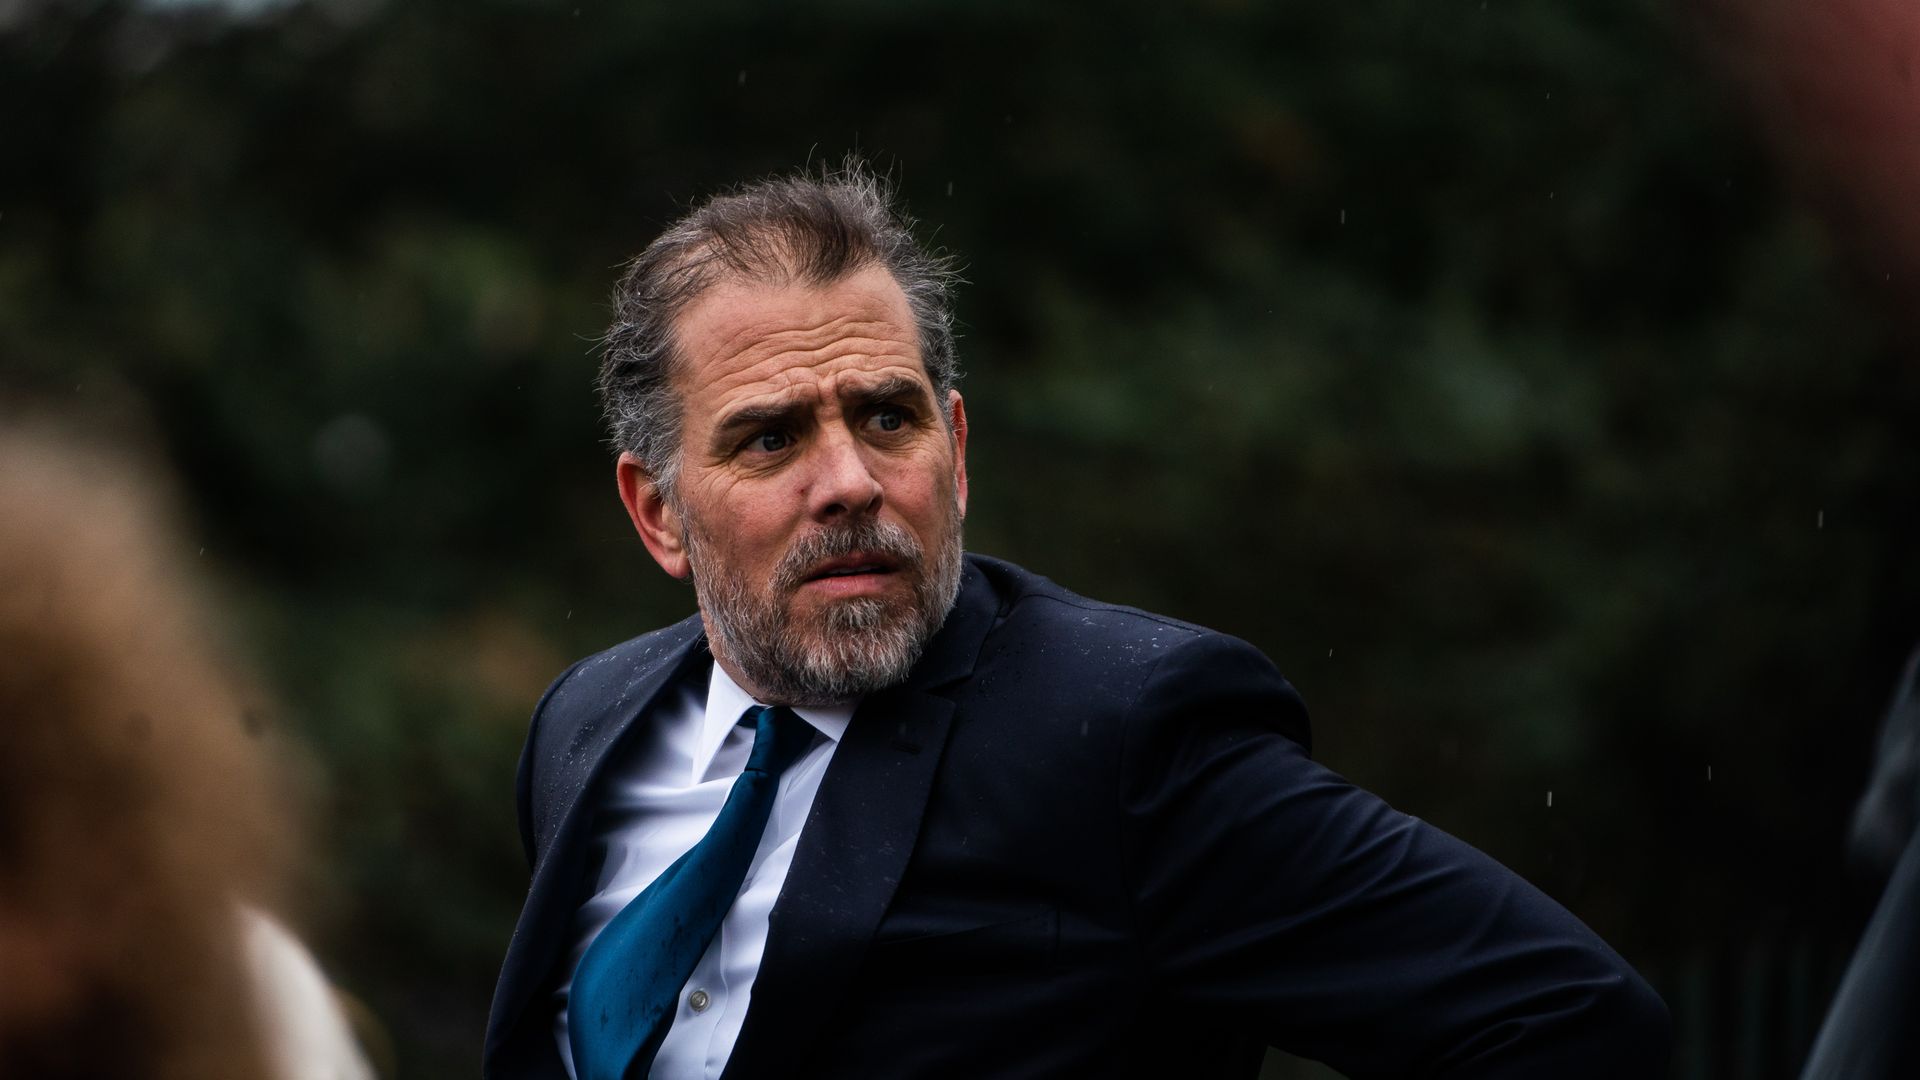 Hunter Biden during the White House Easter Egg Roll on the South Lawn on April 18, 2022.